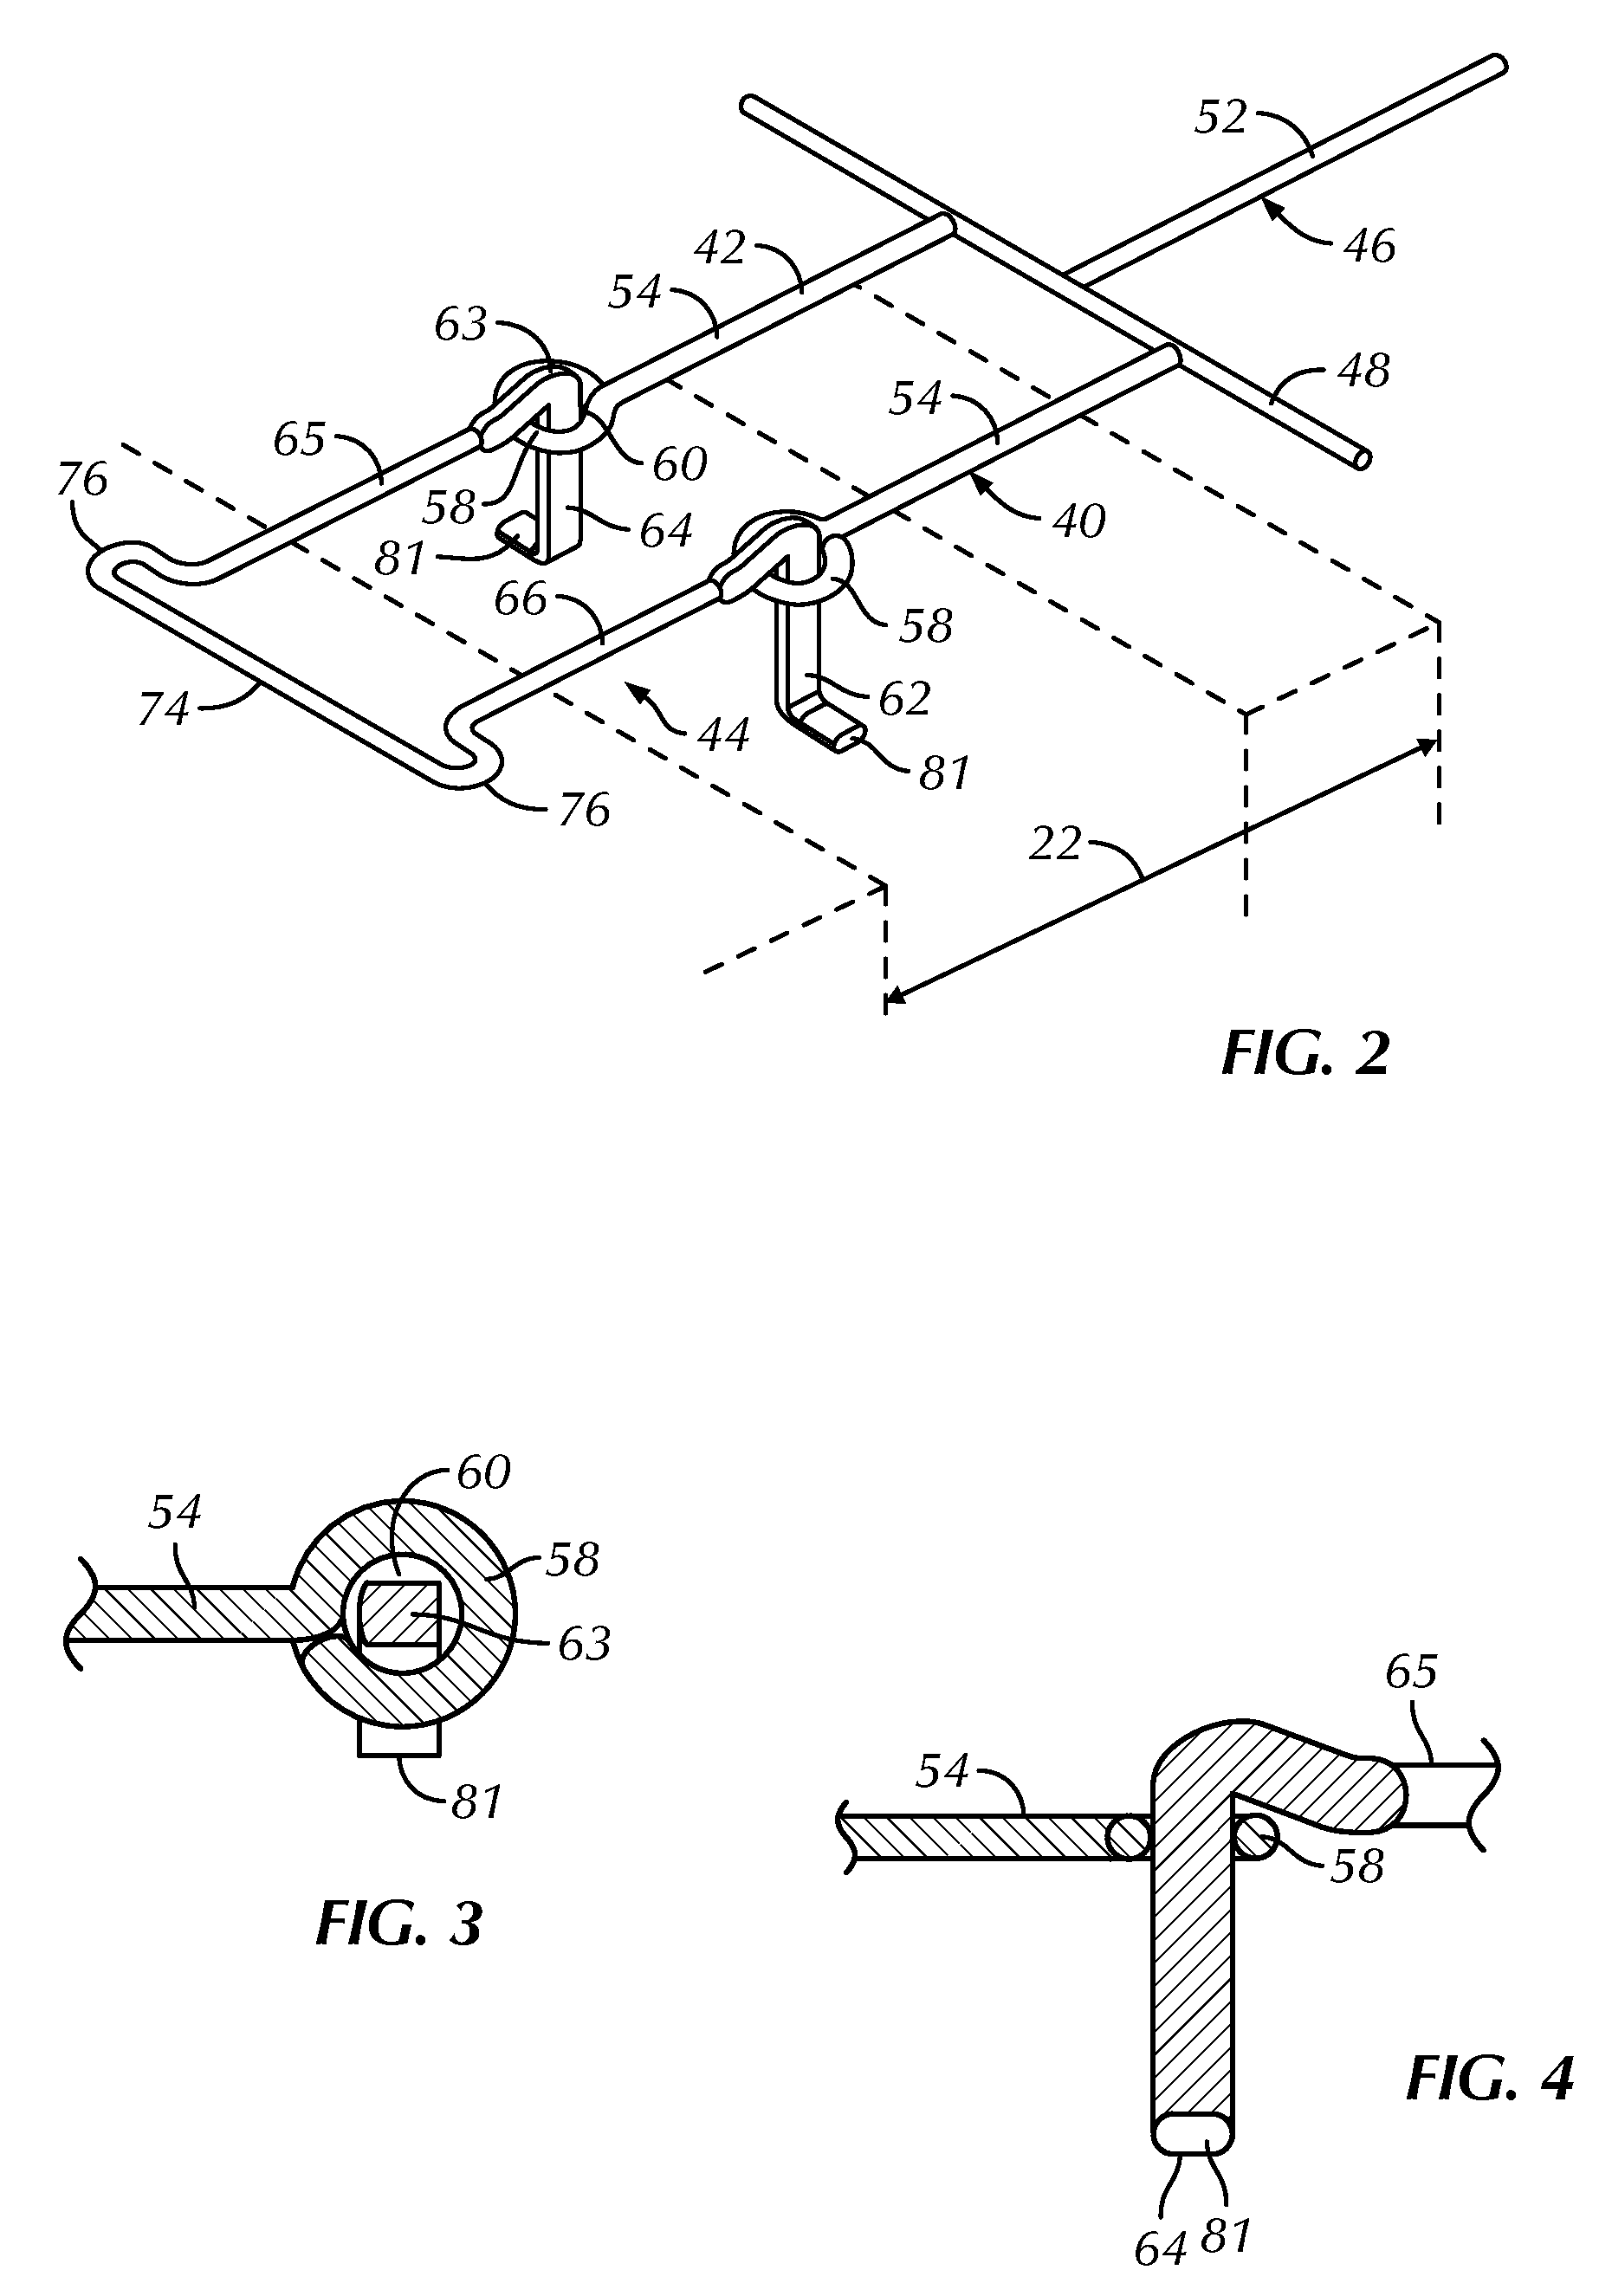 Pullout resistant pintle and anchoring system utilizing the same